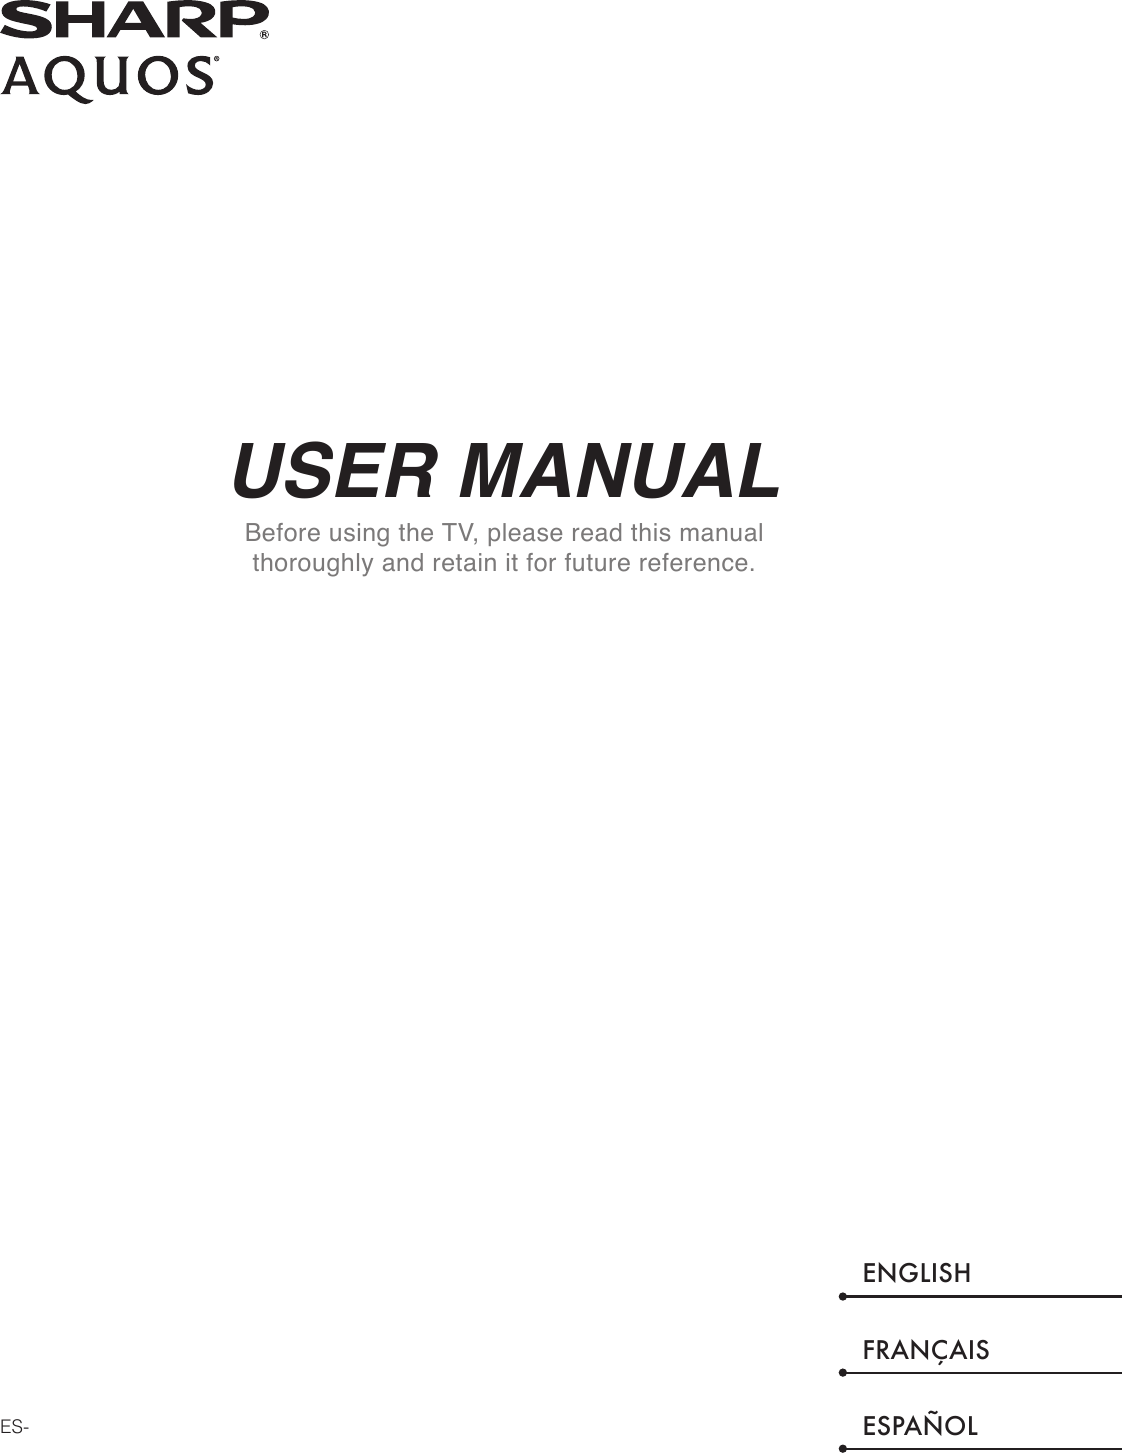 USER MANUALBefore using the TV, please read this manual thoroughly and retain it for future reference.ENGLISHFRANÇAISESPAÑOLES-